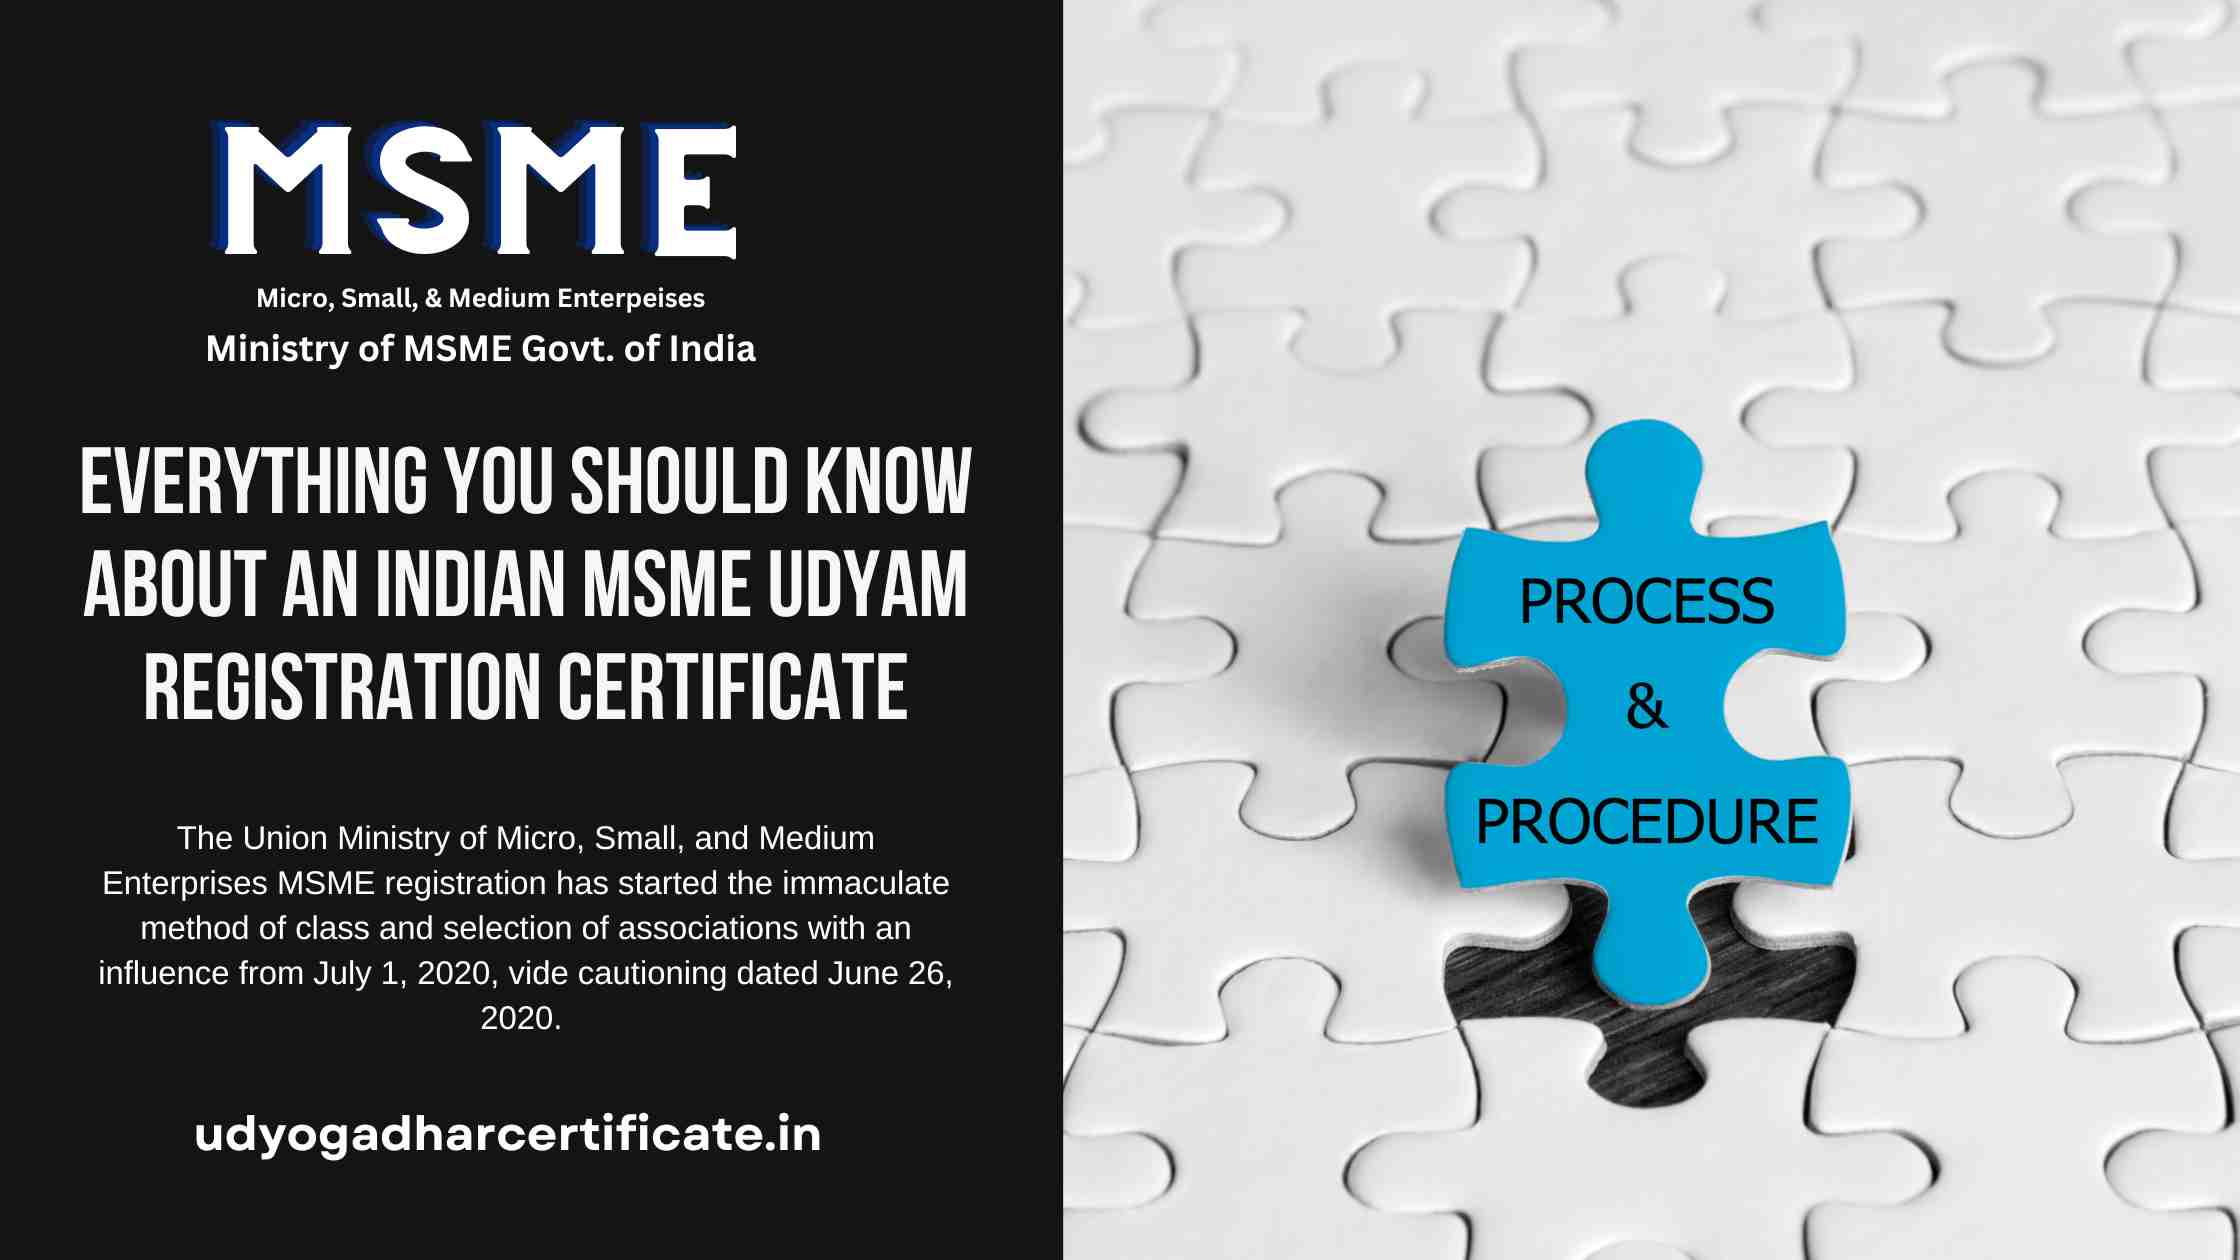 Everything You Should Know About an Indian MSME Udyam Registration Certificate